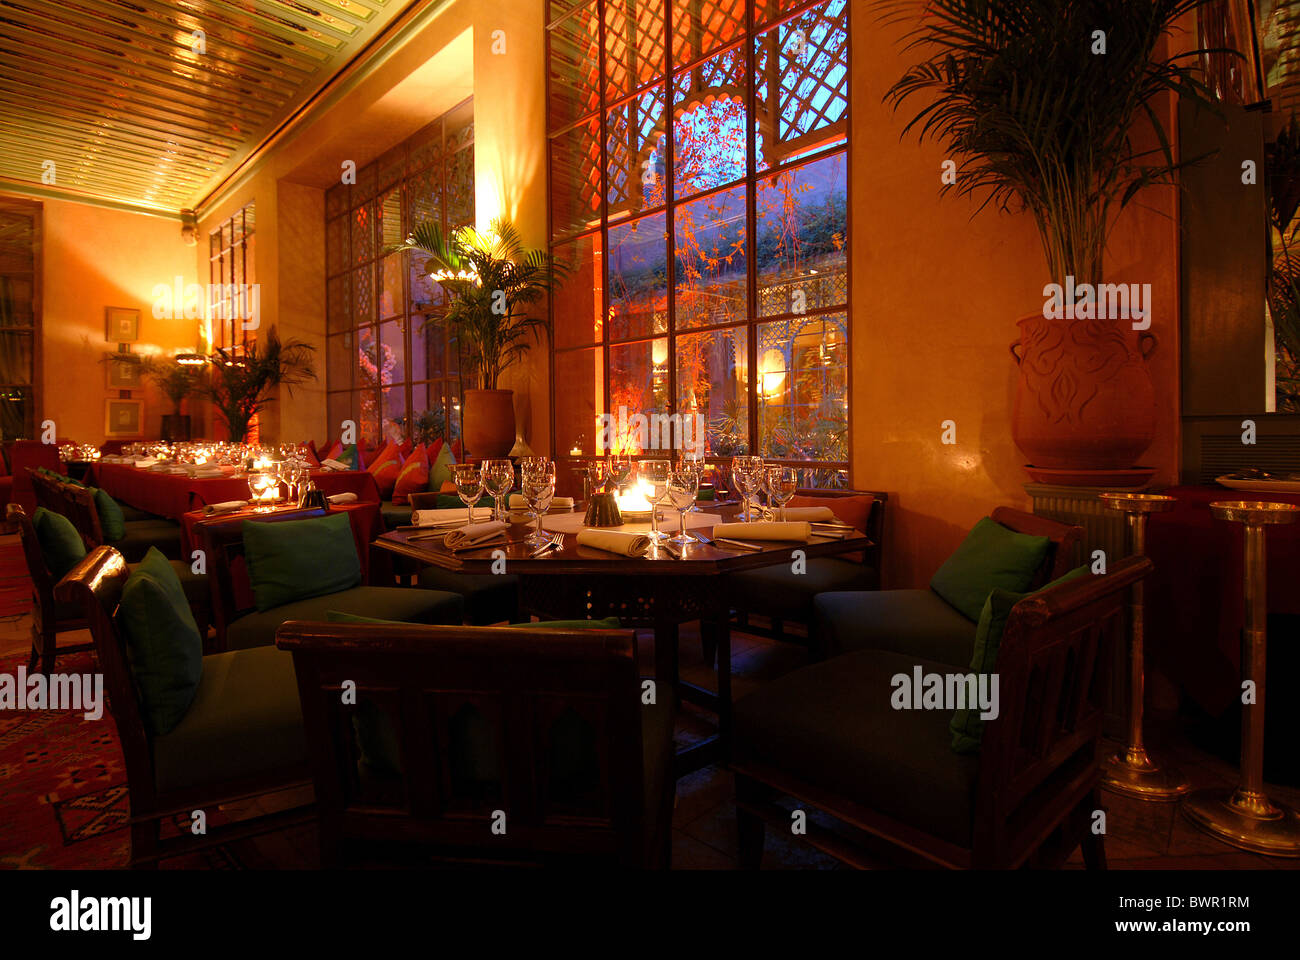 Morocco Africa Marrakech club restaurant lounge lifestyle evening illuminated candles lights ambience ambi Stock Photo